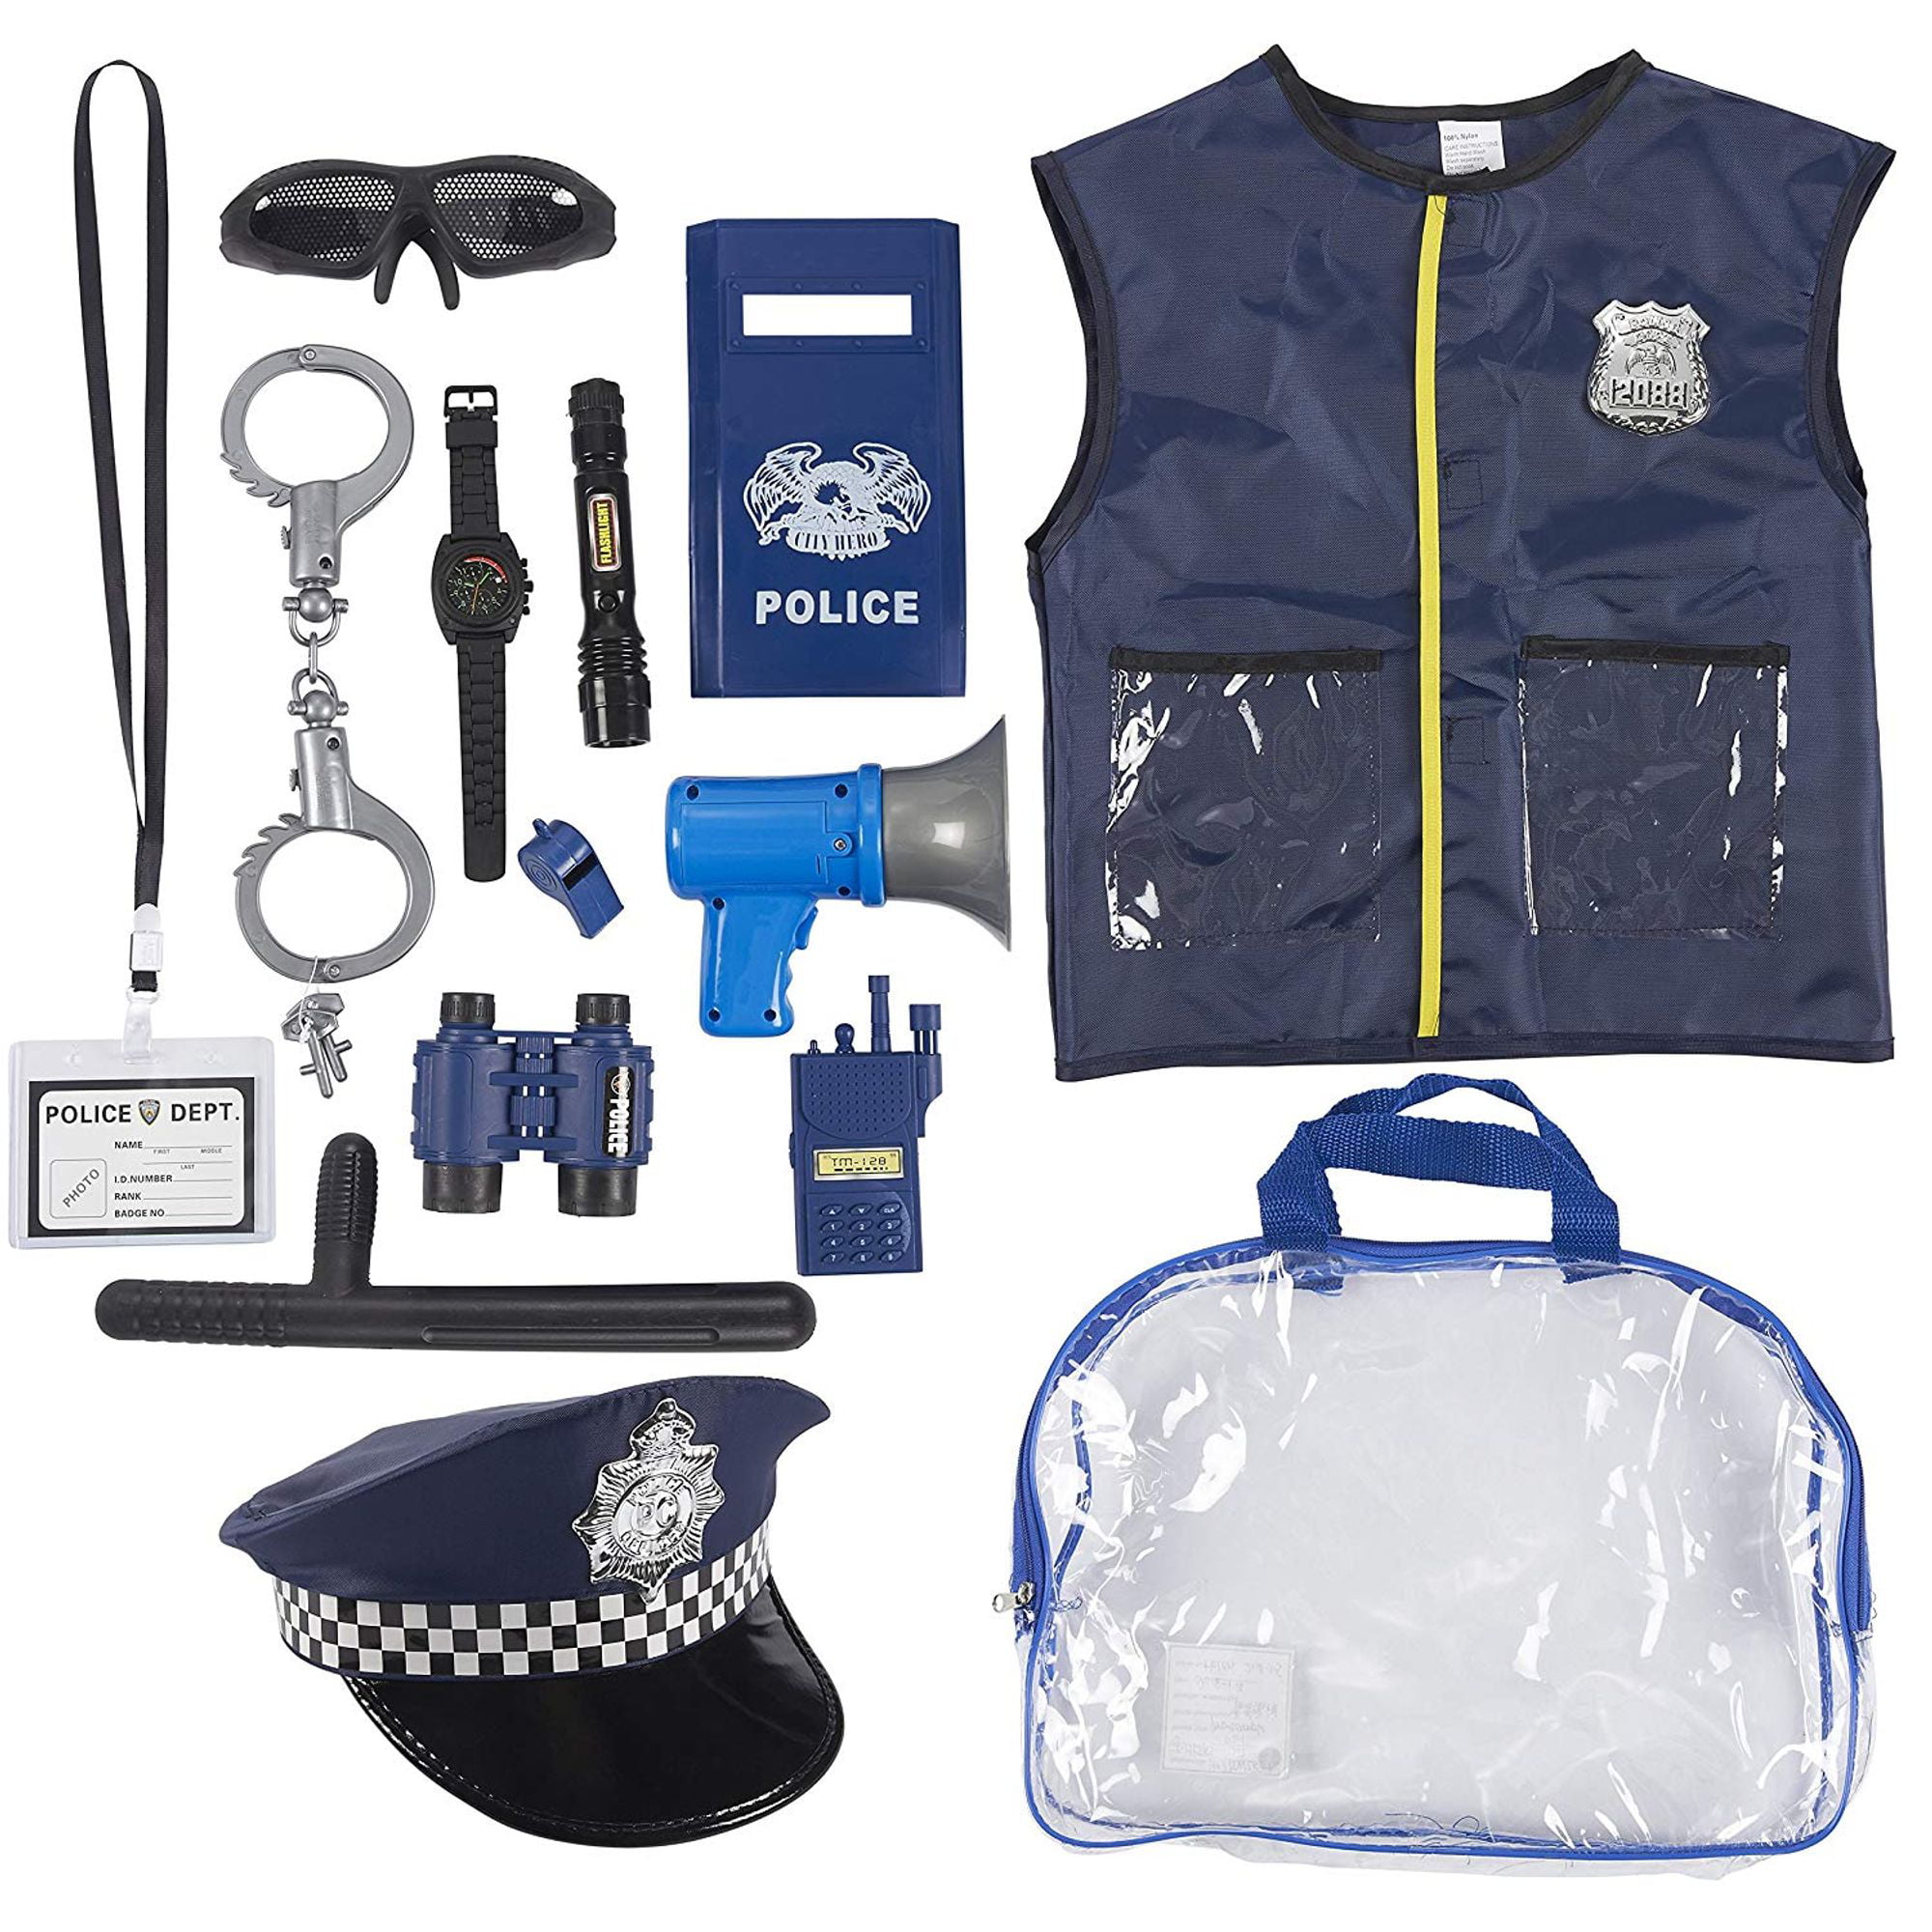 Role Play Pretend Play & More Kids Dress Up for Halloween Costumes Proud Police Accessory Kit 